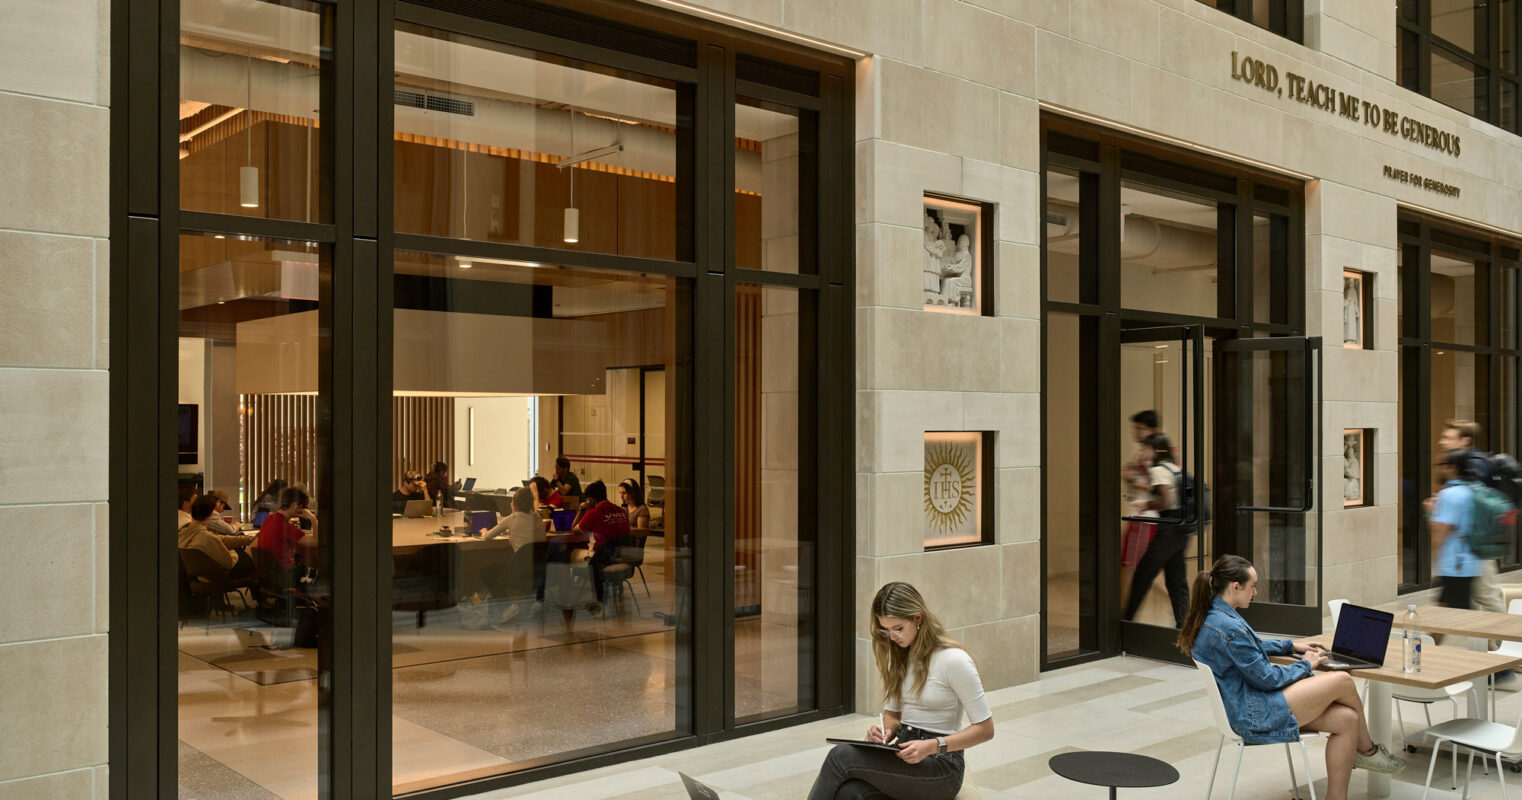 Contemporary educational space blends functionality with aesthetic, featuring expansive windows, sleek black frames, and a sandstone façade. Light-filled atrium provides a communal setting for learning, showcased by students engaging with technology on modern furniture.